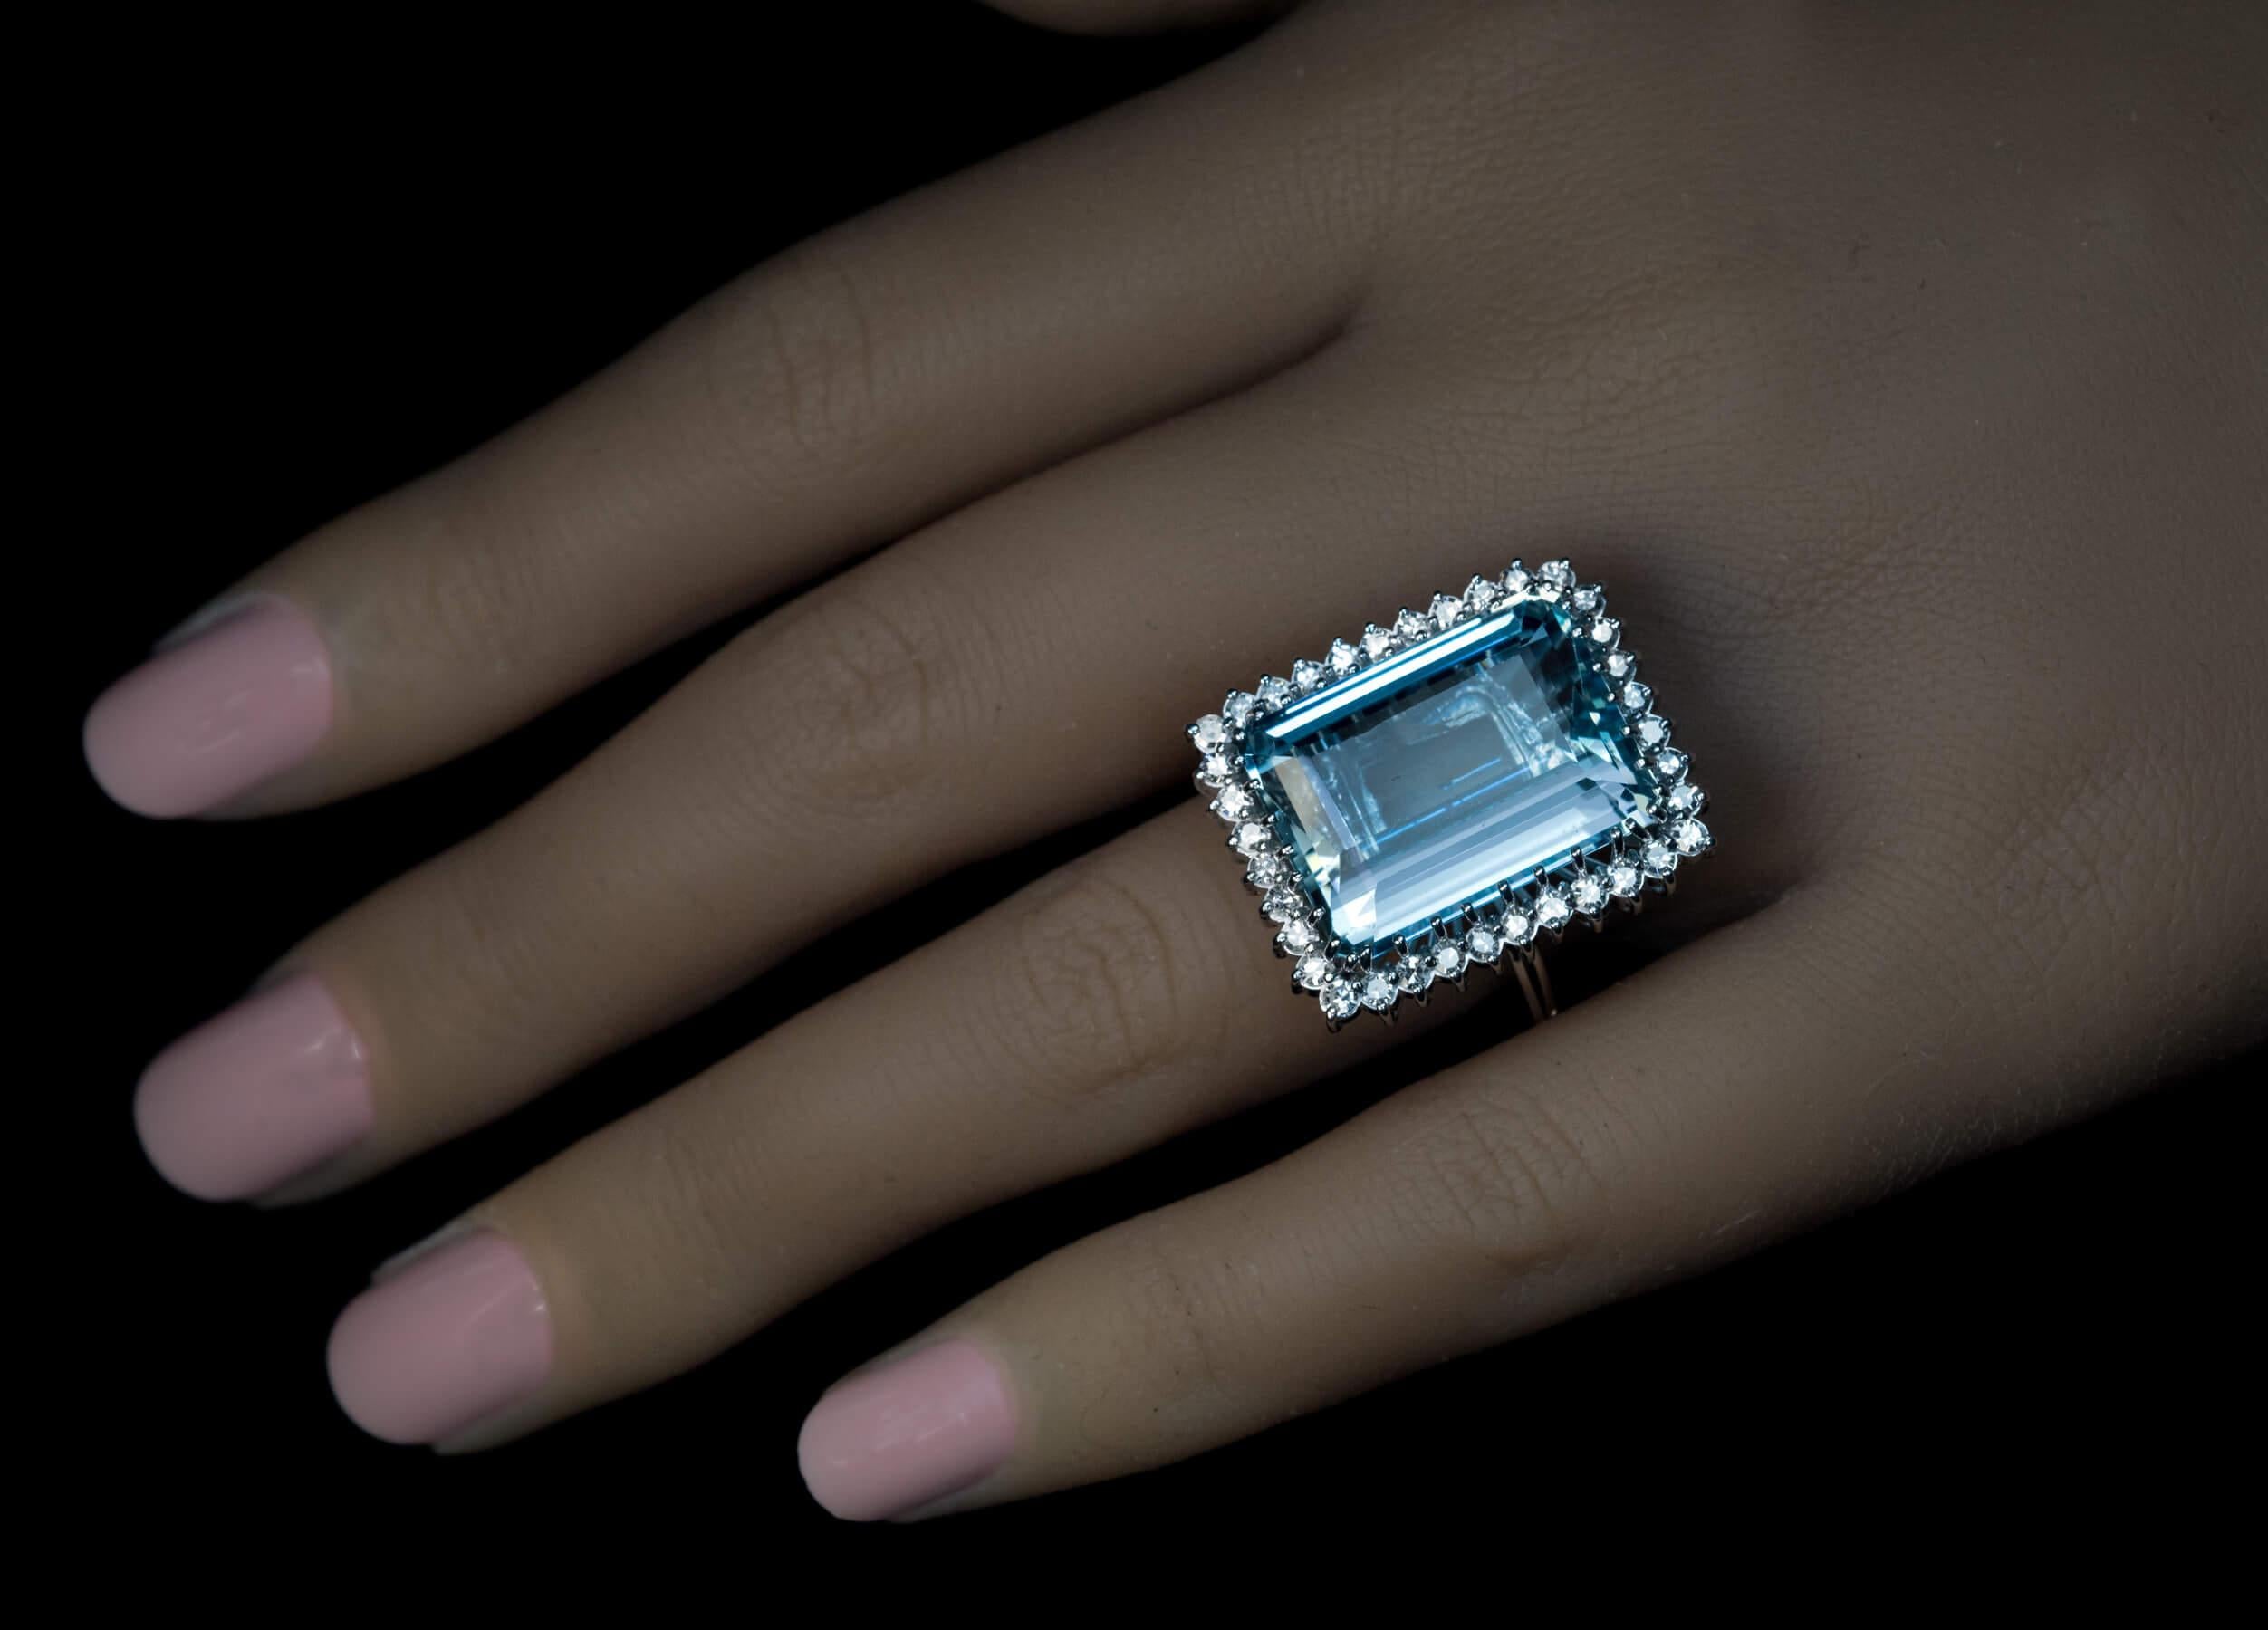 Circa 1970  The 14K white gold ring features a large aquamarine of a cool light blue color framed by single cut diamonds.  The aquamarine measures 18.98 x 14.01 x 8.81 mm and is approximately 16.05 carats.  Estimated total diamond weight is 1.05